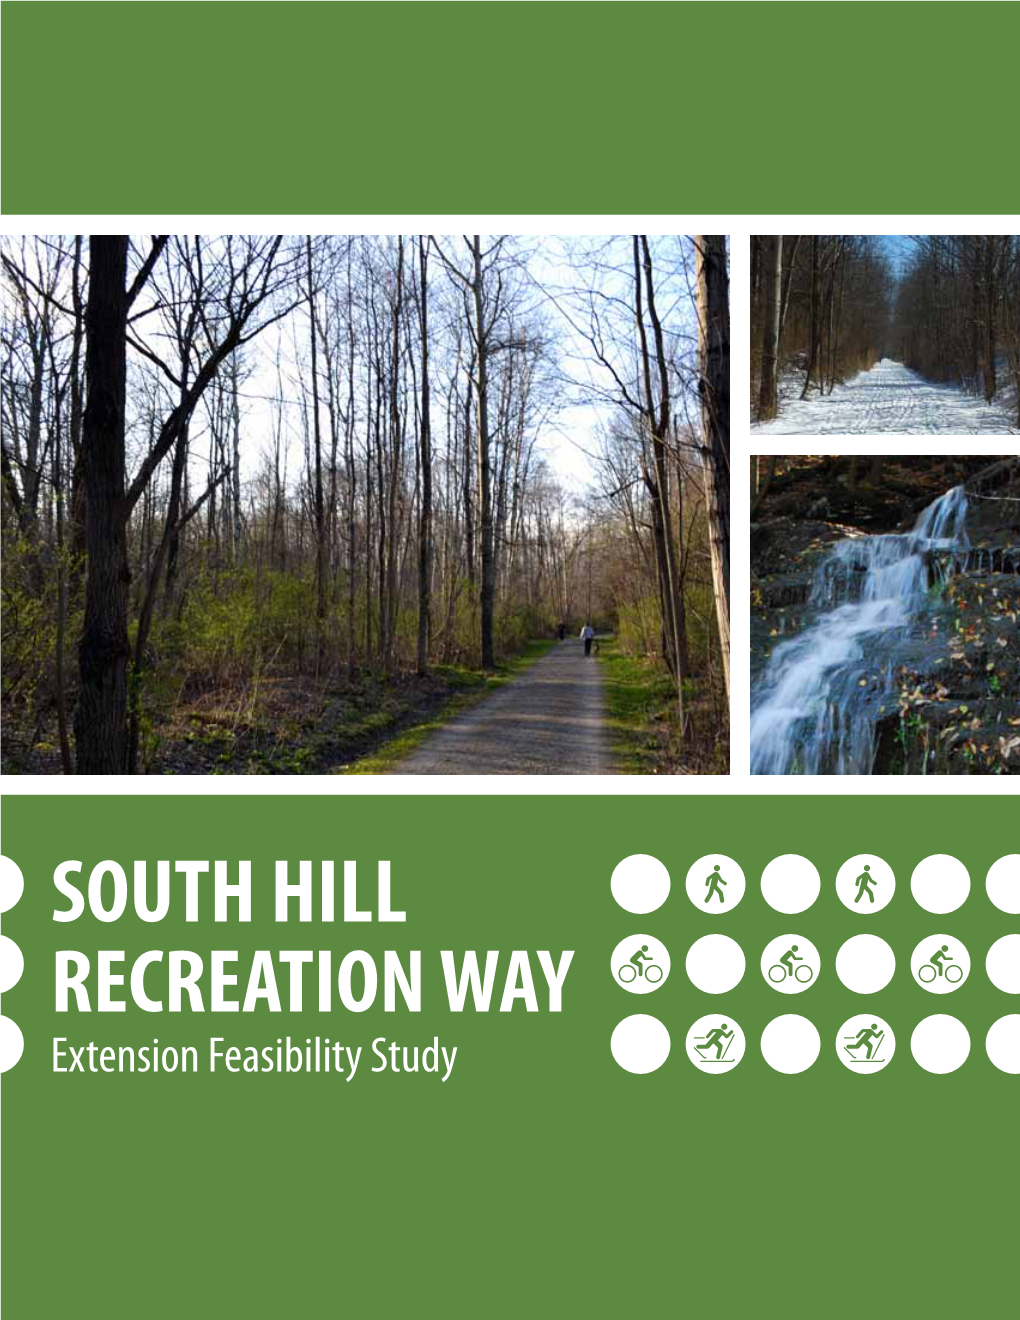 South Hill Recreation